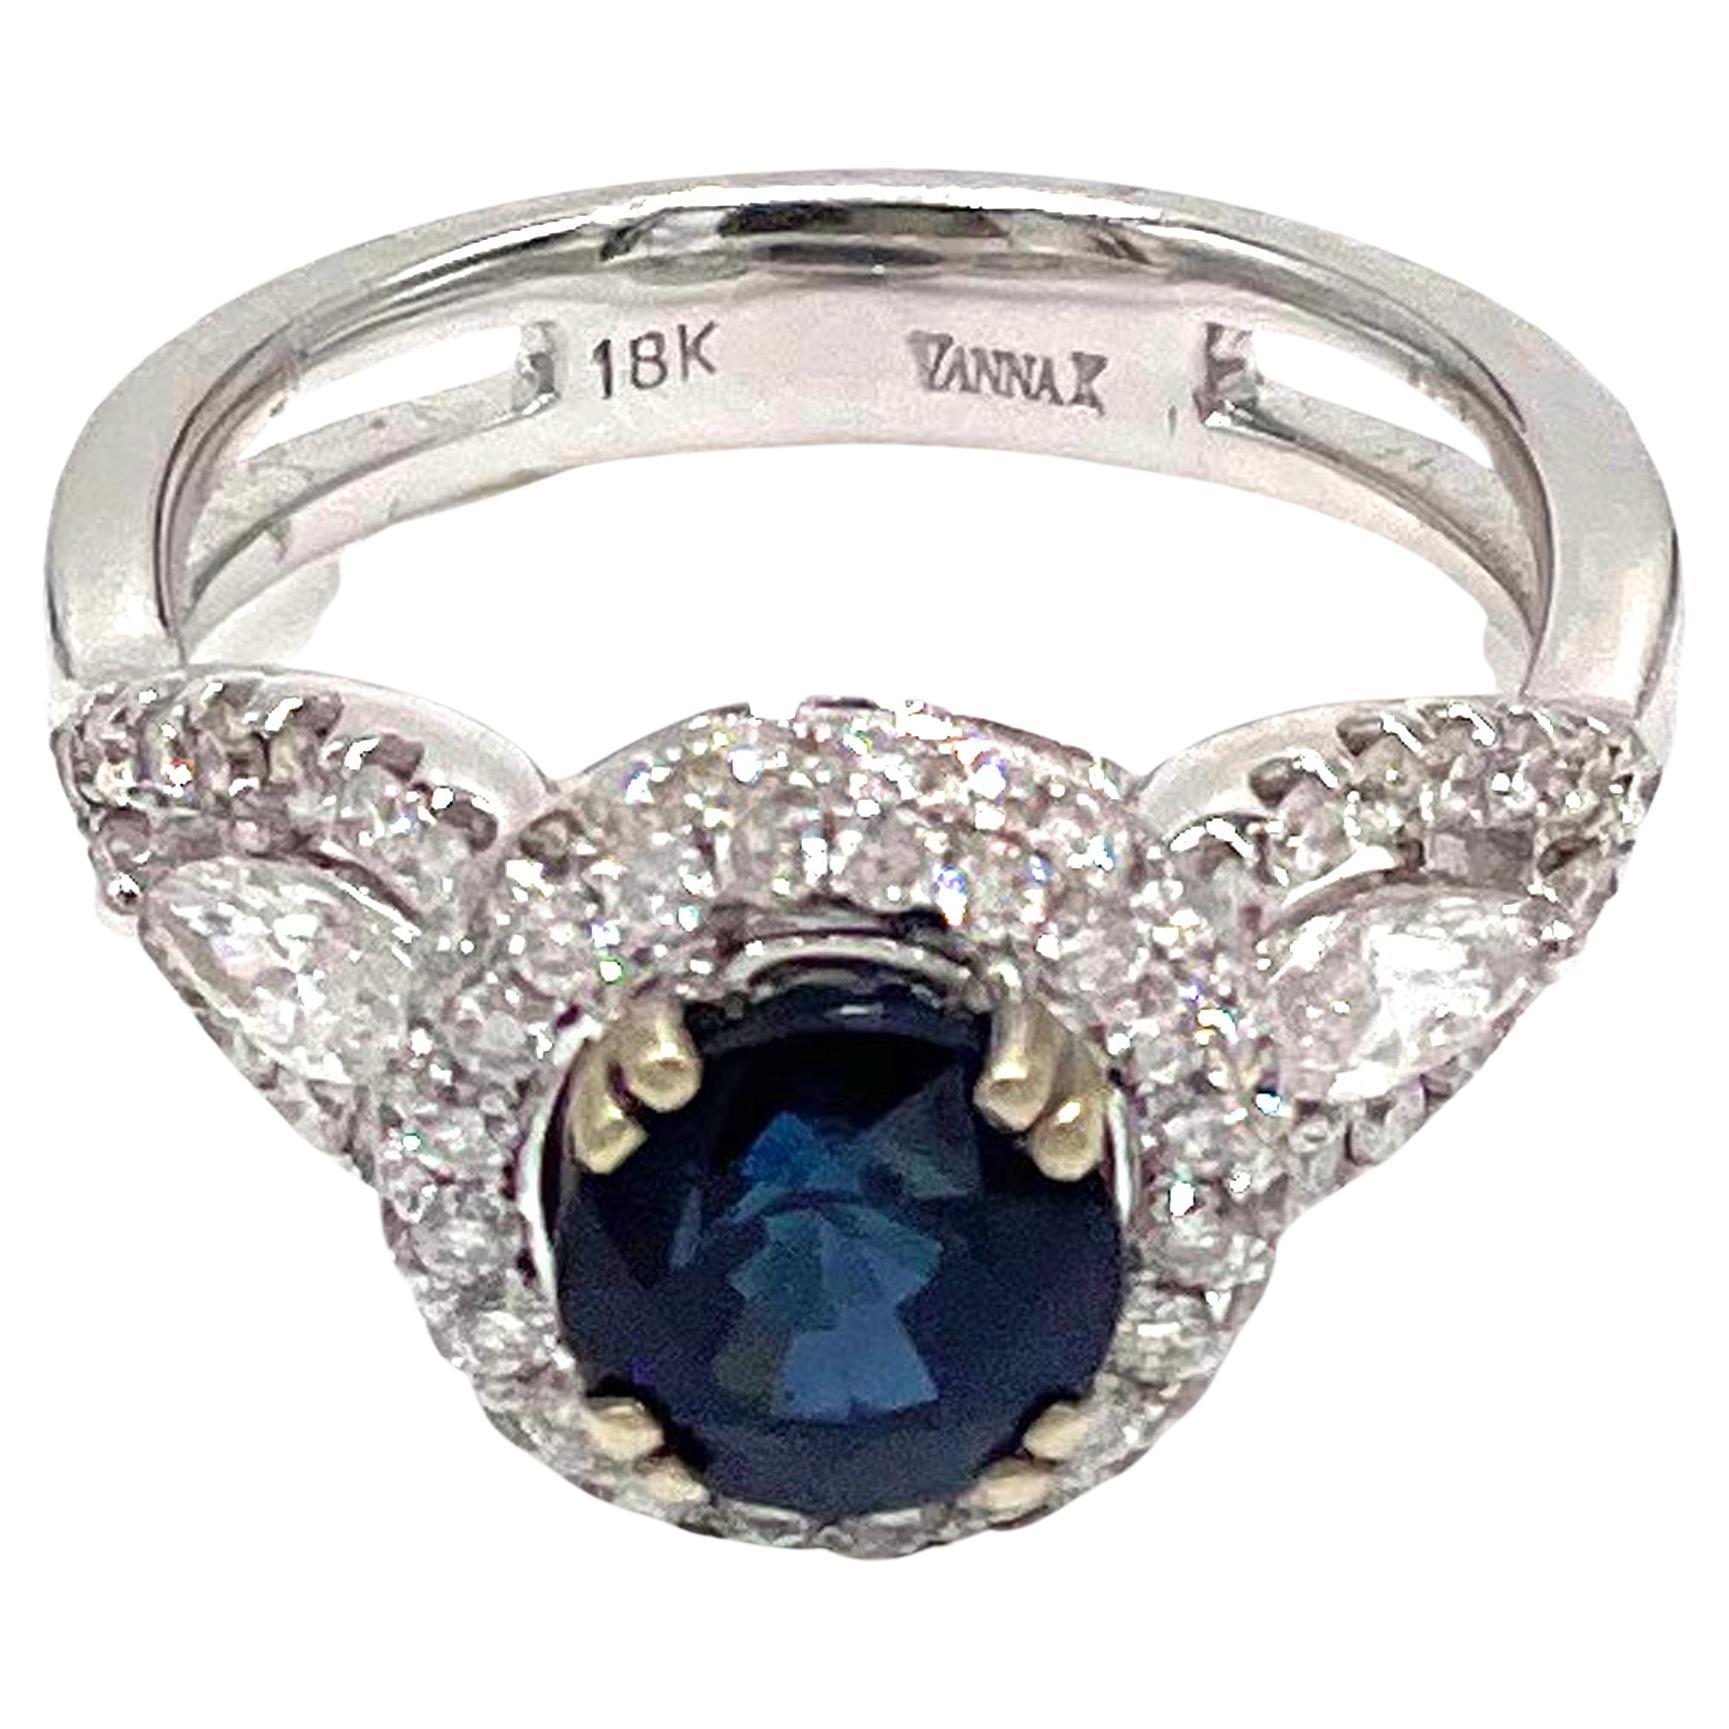 Vanna K 18K white gold three stone halo ring with two side marquis cut diamonds and round diamonds weighing a total of 1.12 carats. One center round blue sapphire 2.00 carats.

* Finger size 6.5
* Style No. 18RO6280DCZ
* Diamonds are G/H color,